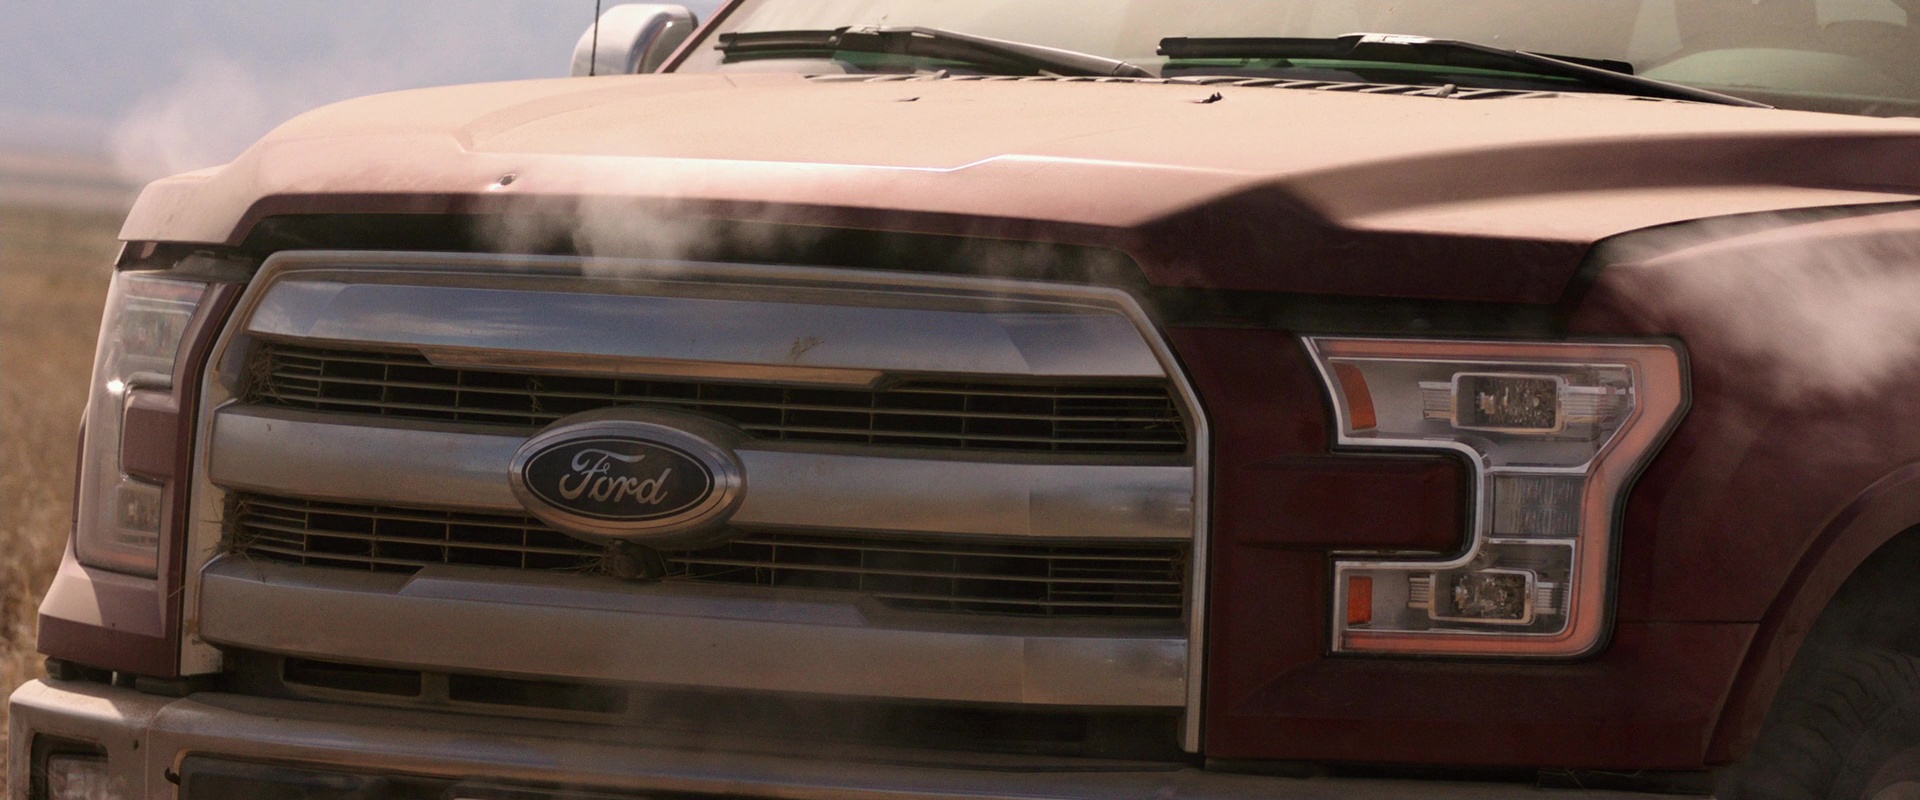 Ford F-150 Truck Used by Tommy Lee Jones in Just Getting Started (2017) Movie1920 x 800